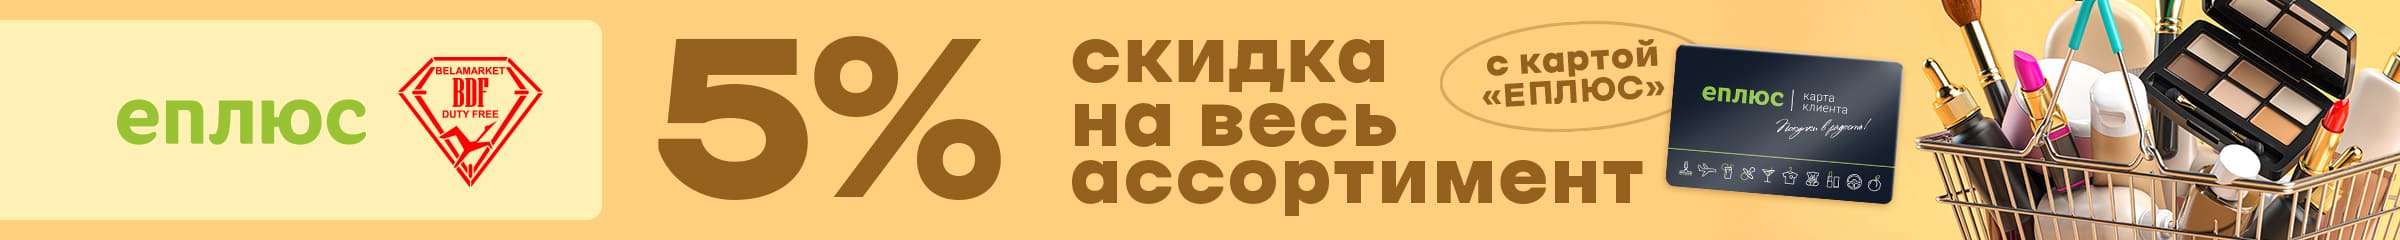 Беламаркет Дьюти Фри